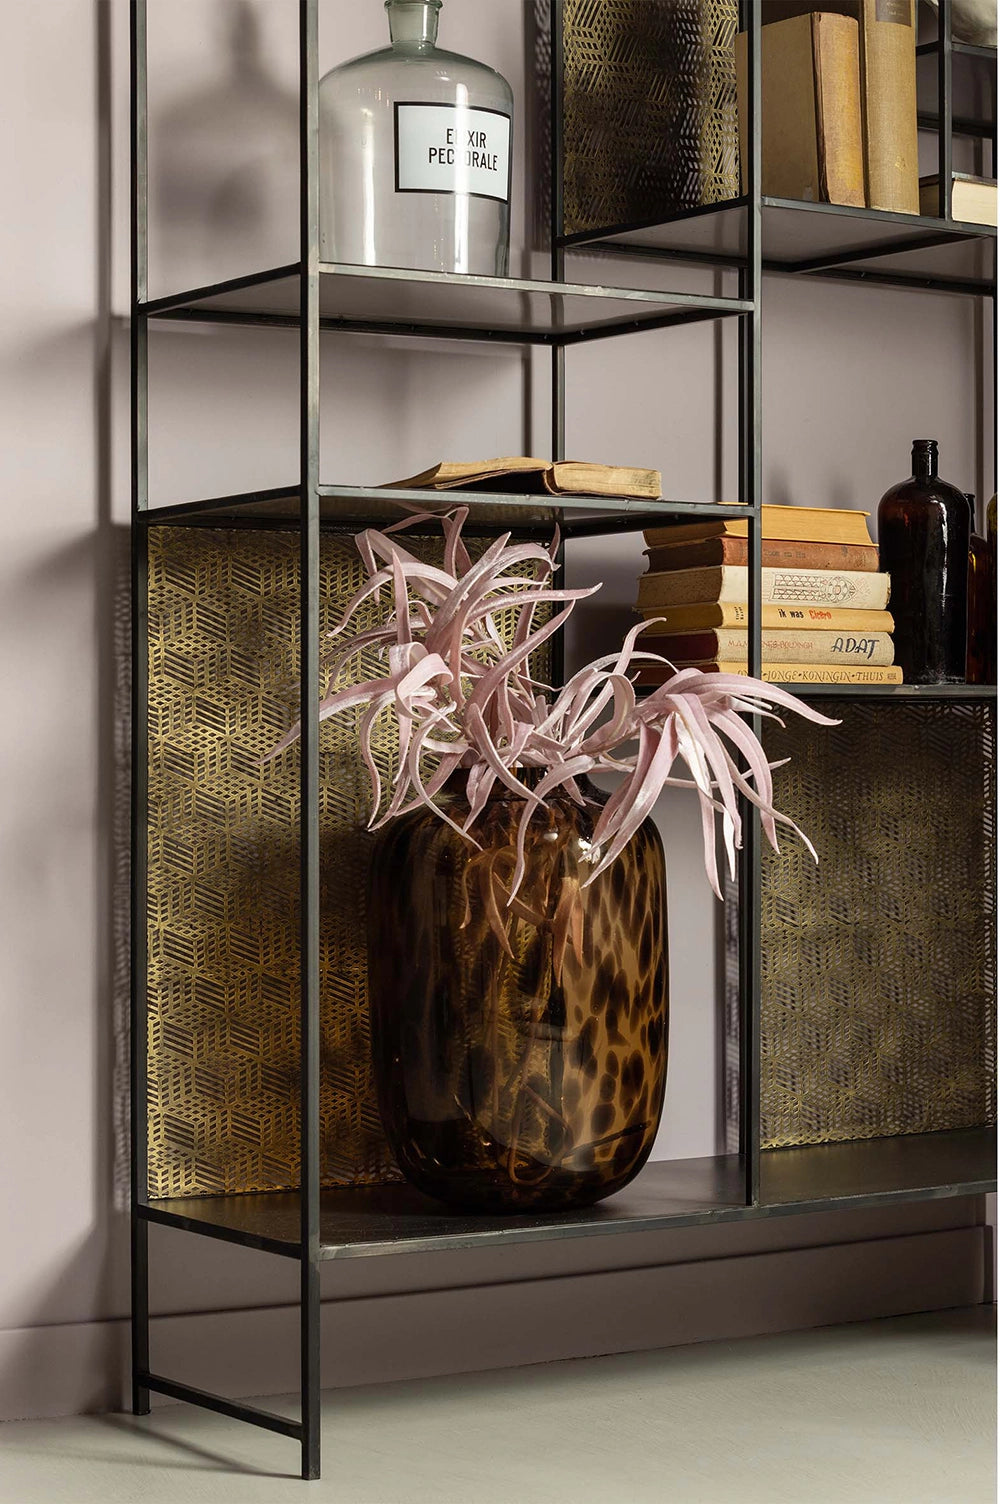 Viktor Display Cabinet in - Black/Antique Brass Finish with Bottle and Books in Living Room Setting